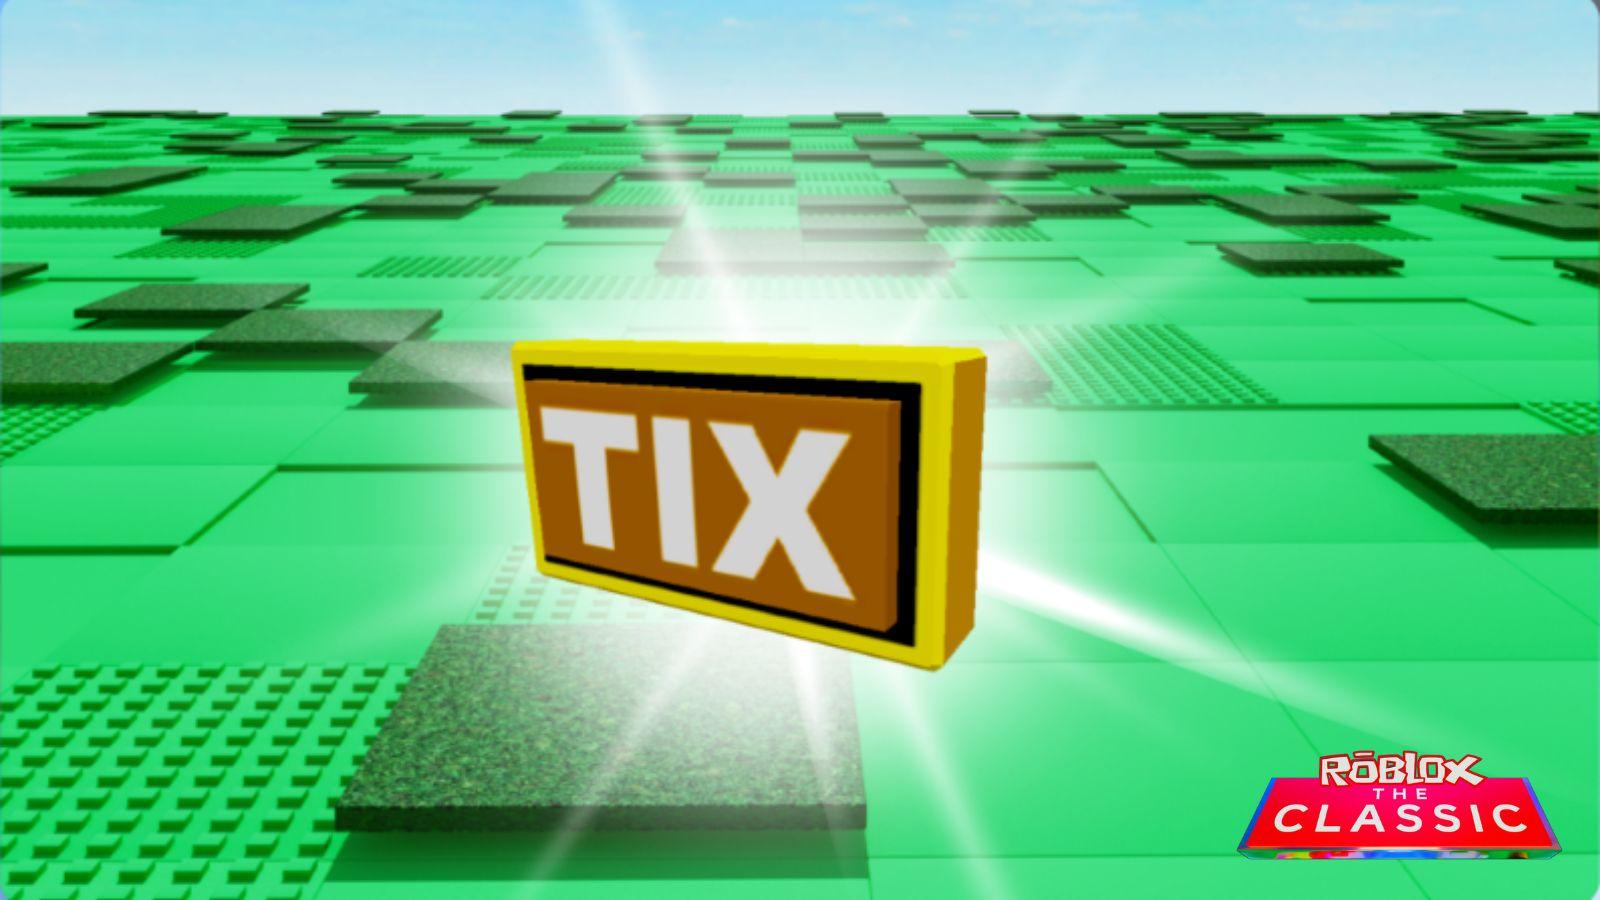 The Tix in Roblox The Classic event